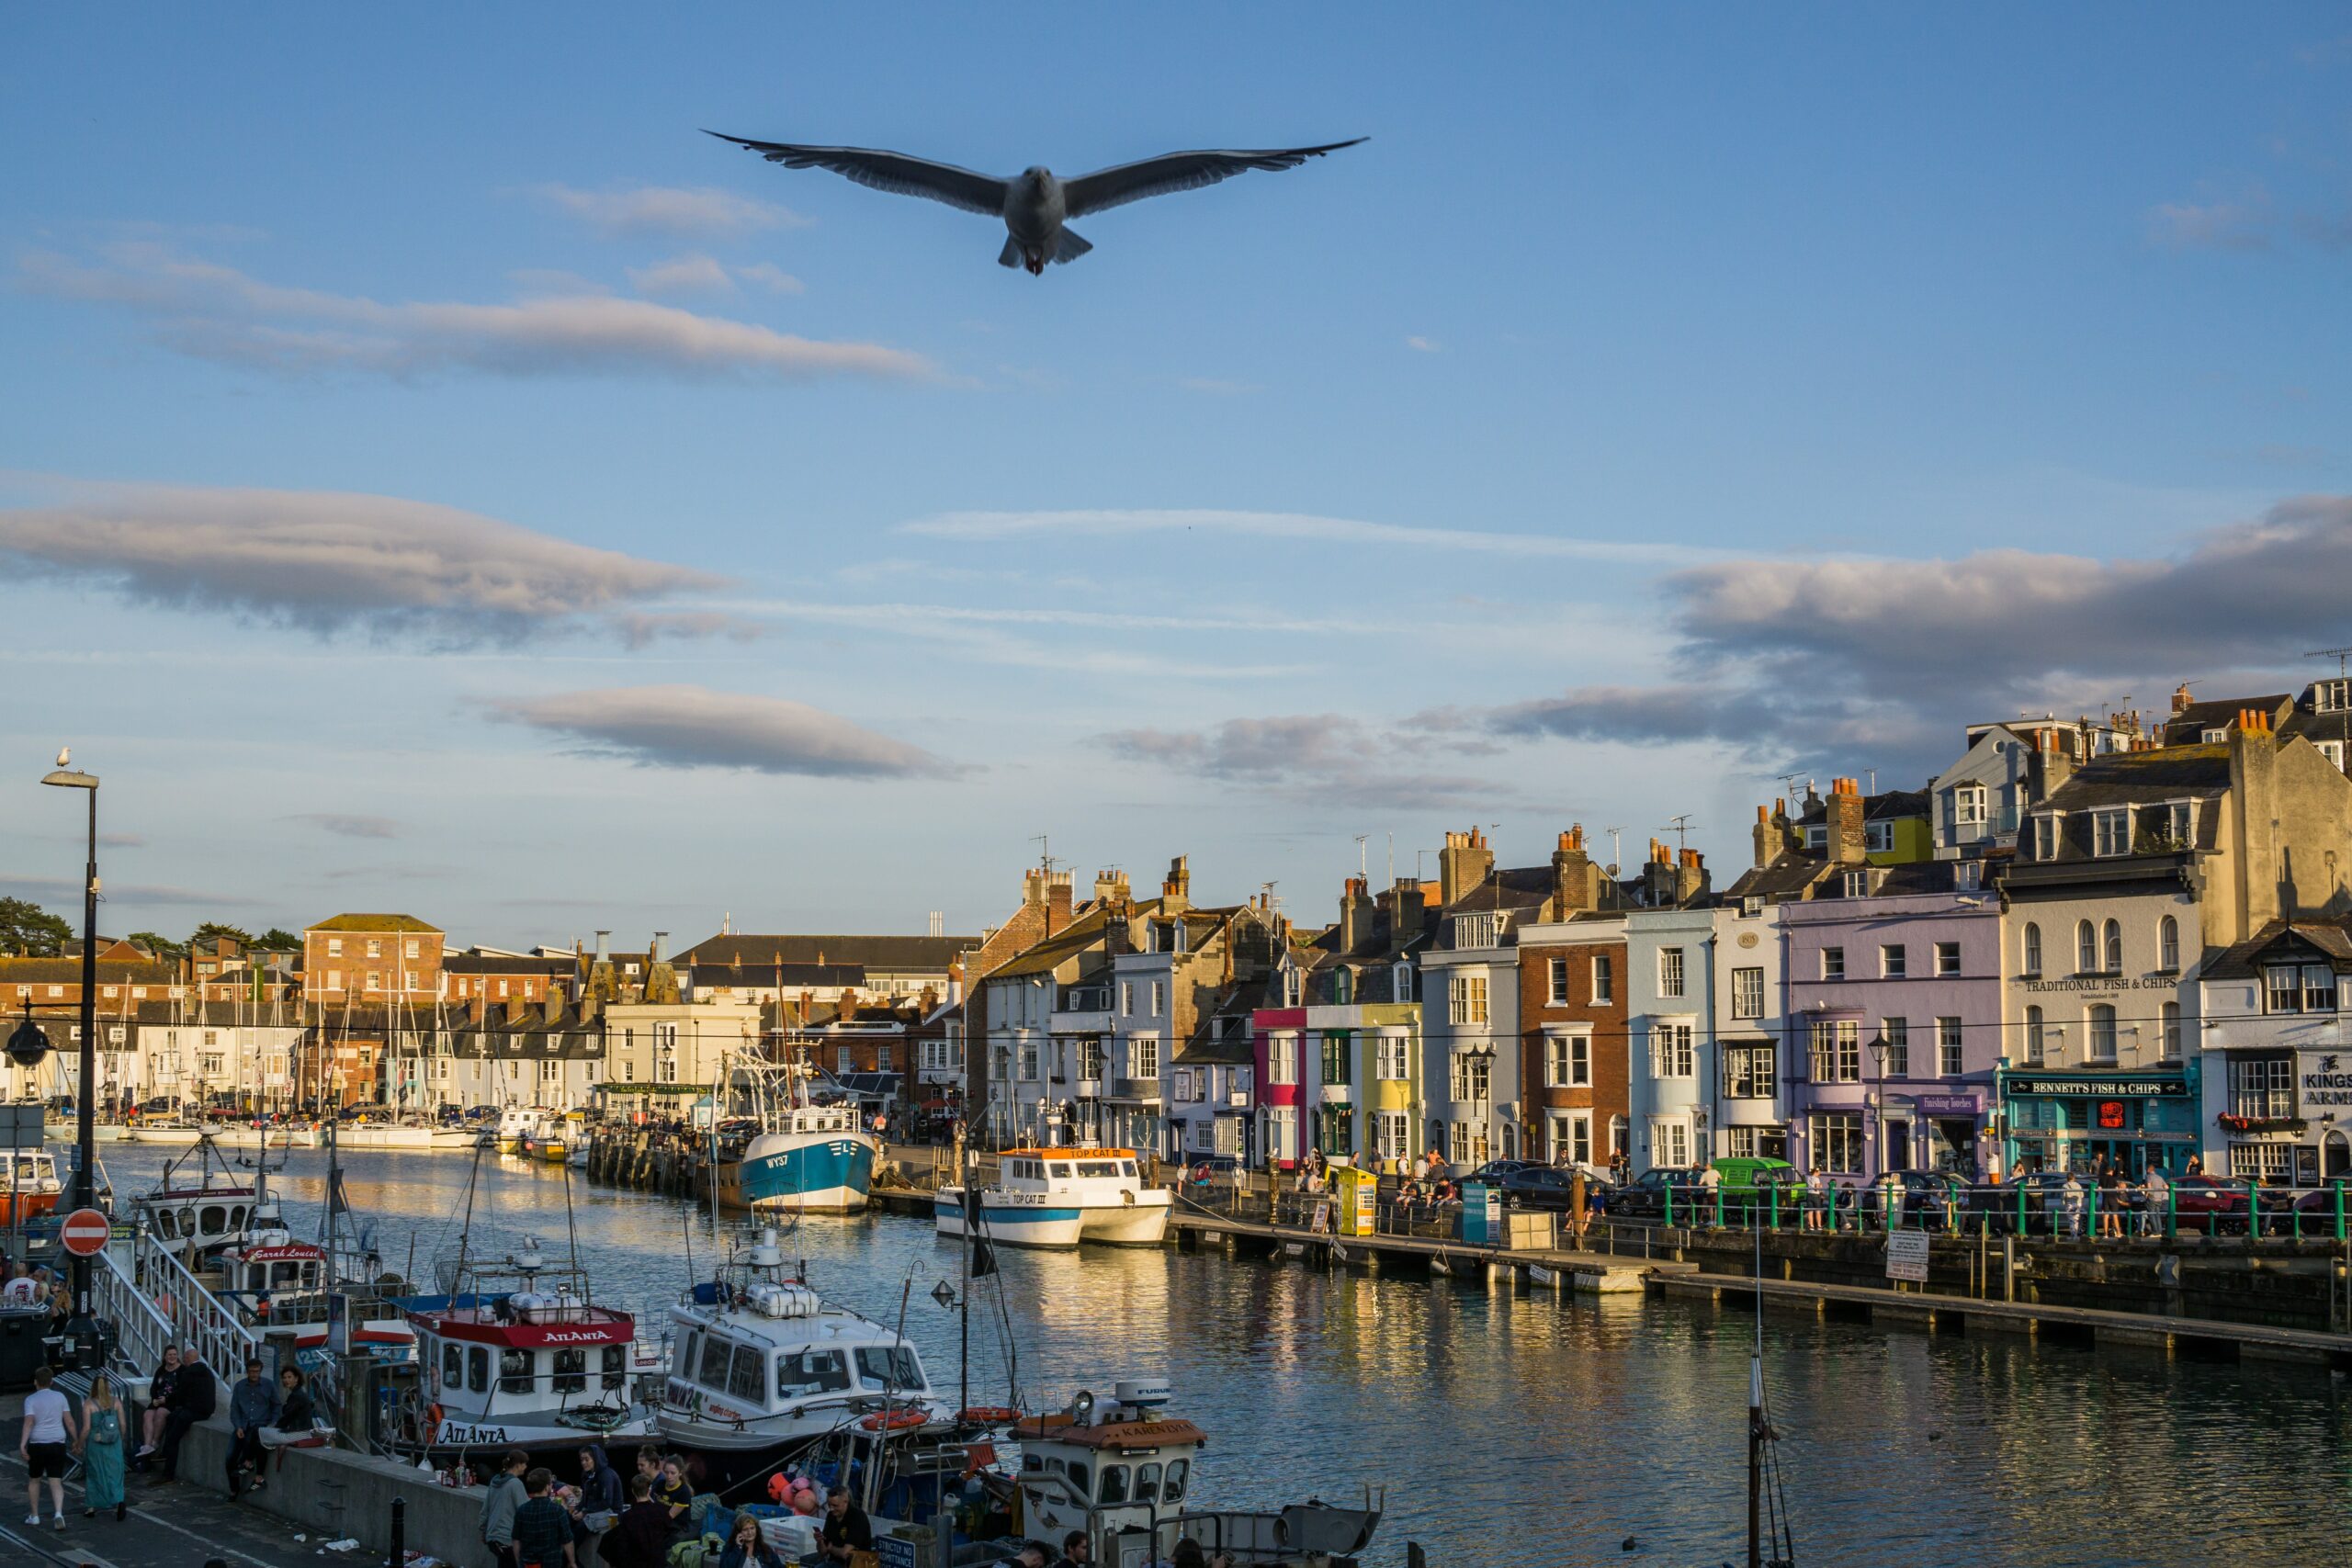 Image of Weymouth, Dorset, for their Sustainable Transport Network Monitoring